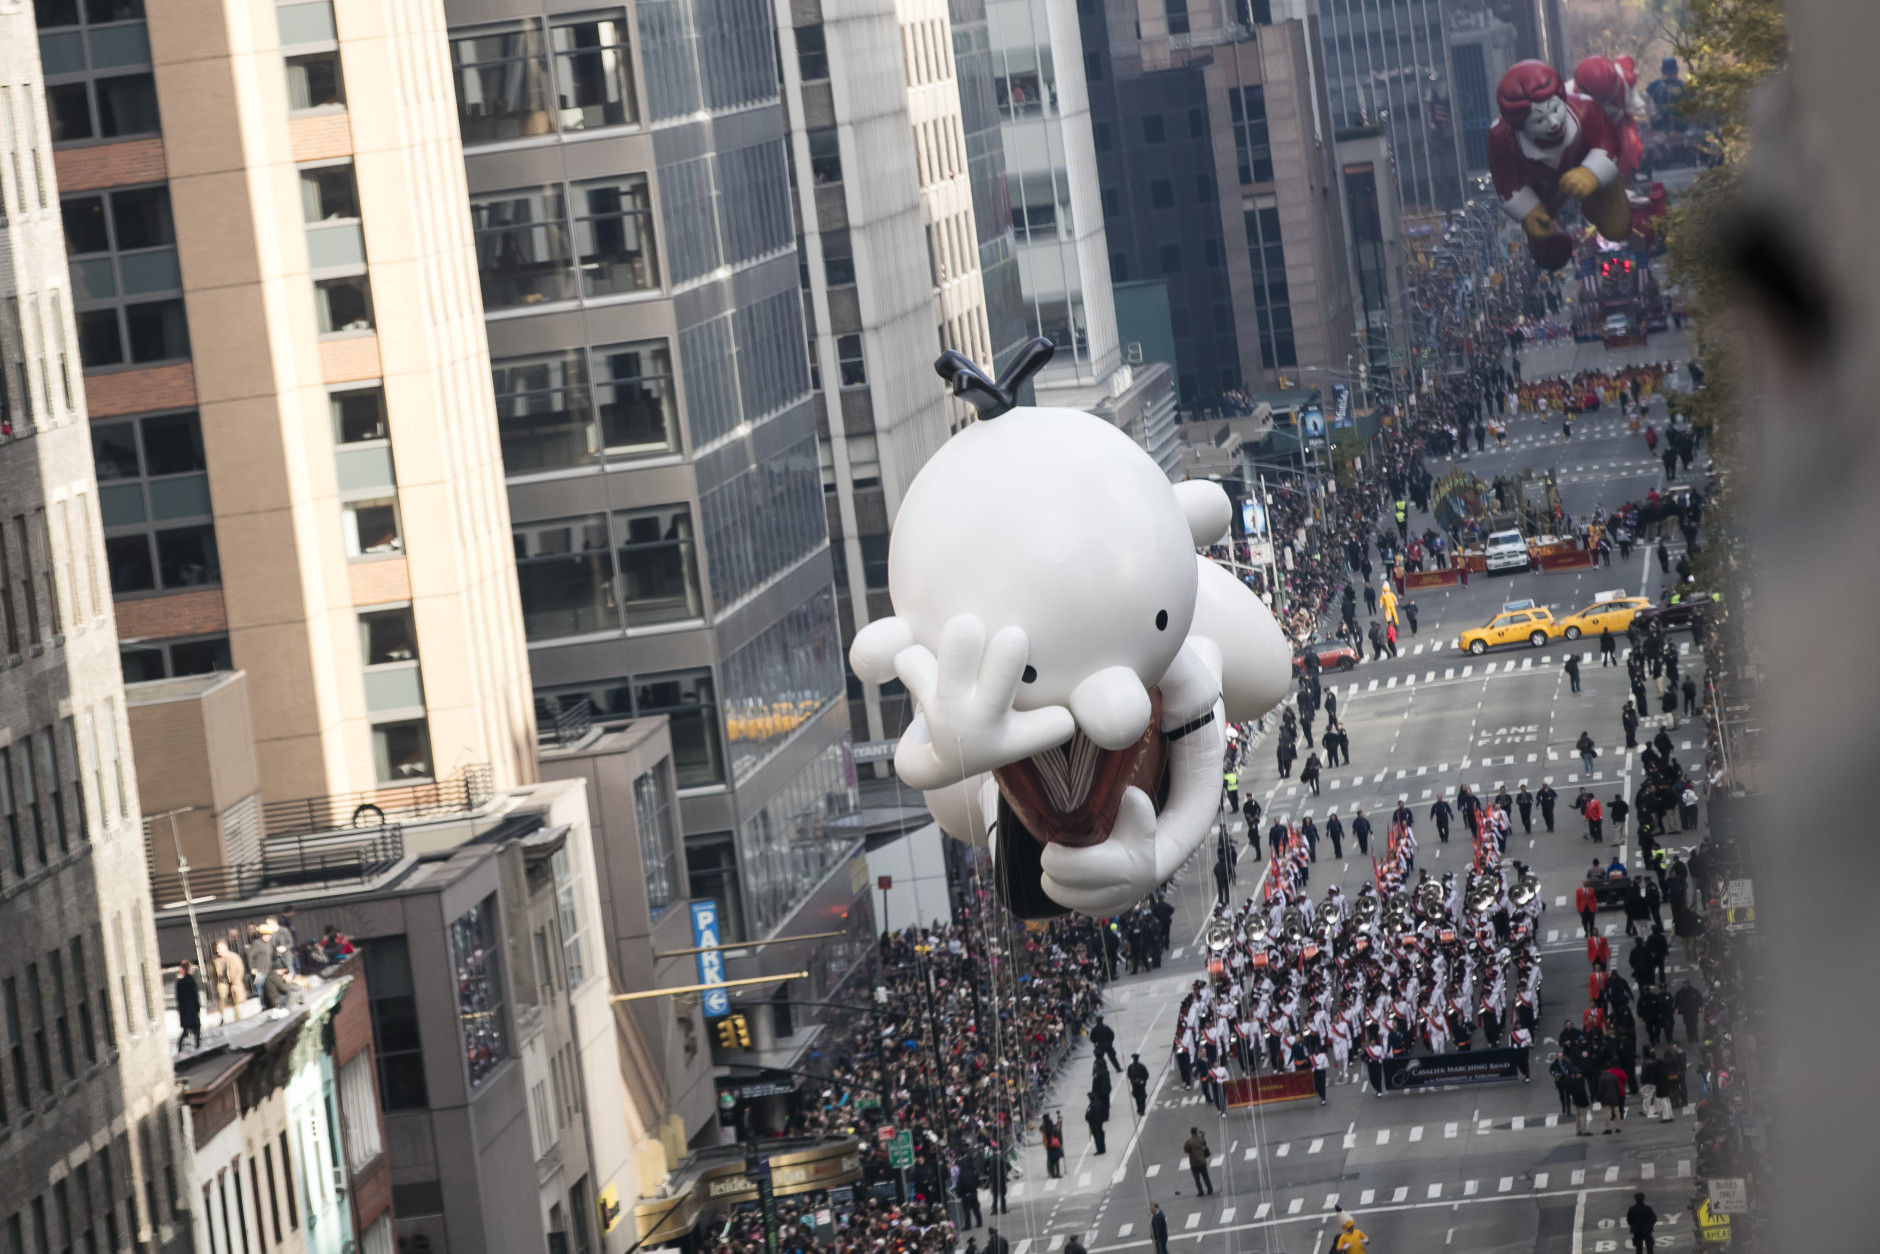 A Diary of a Wimpy Kid balloon goes down 6th Avenue for the 89th annual Macy's Thanksgiving Day Parade as seen from above street level on Thursday, Nov. 26, 2015, in New York. (Photo by Ben Hider/Invision/AP)